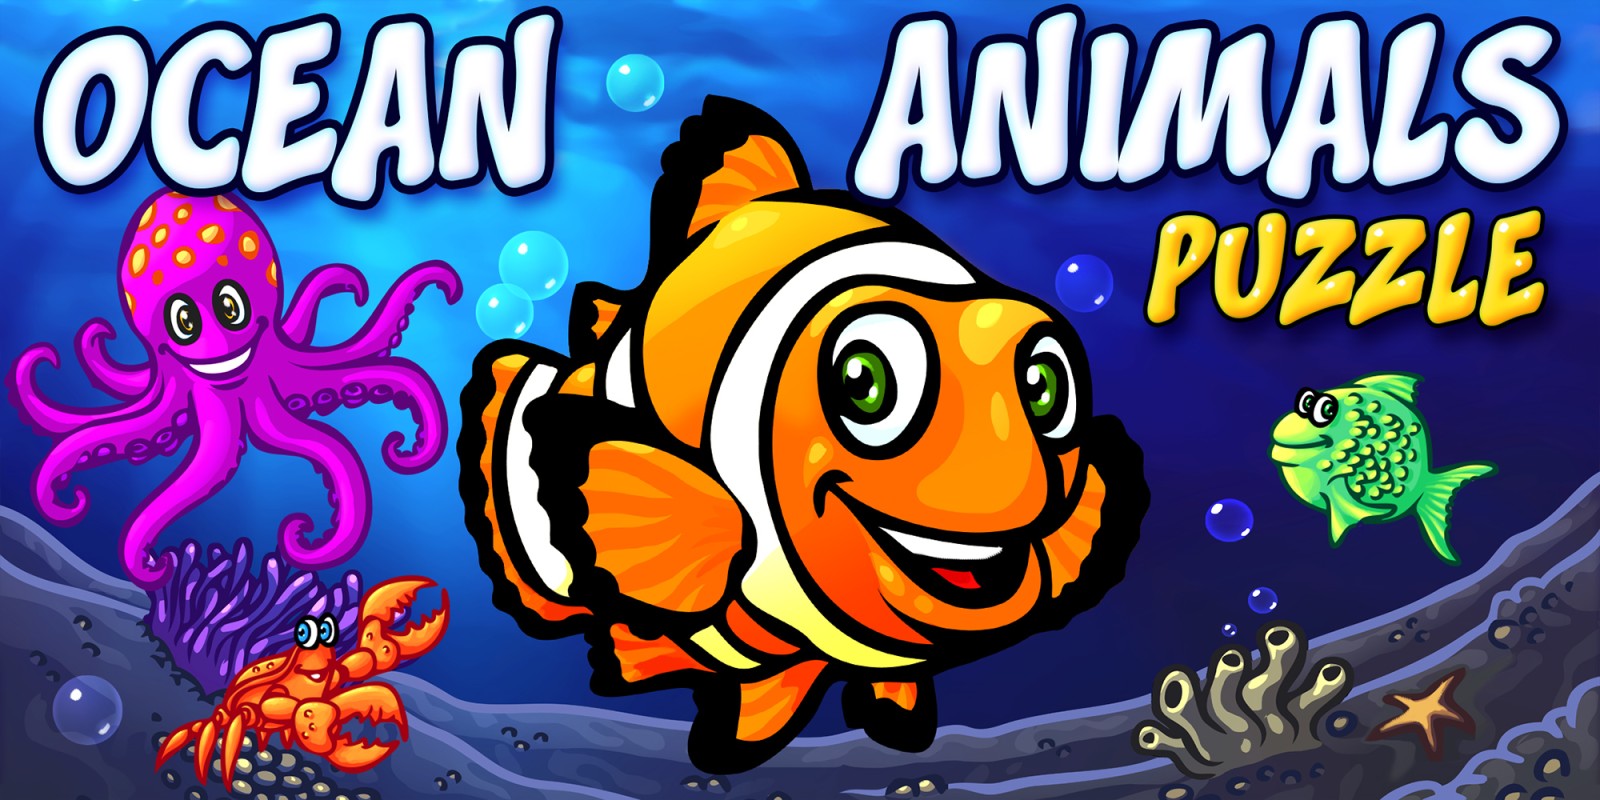 Ocean Animals Puzzle - Preschool Animal Learning Puzzles Game for Kids &  Toddlers | Nintendo Switch download software | Games | Nintendo